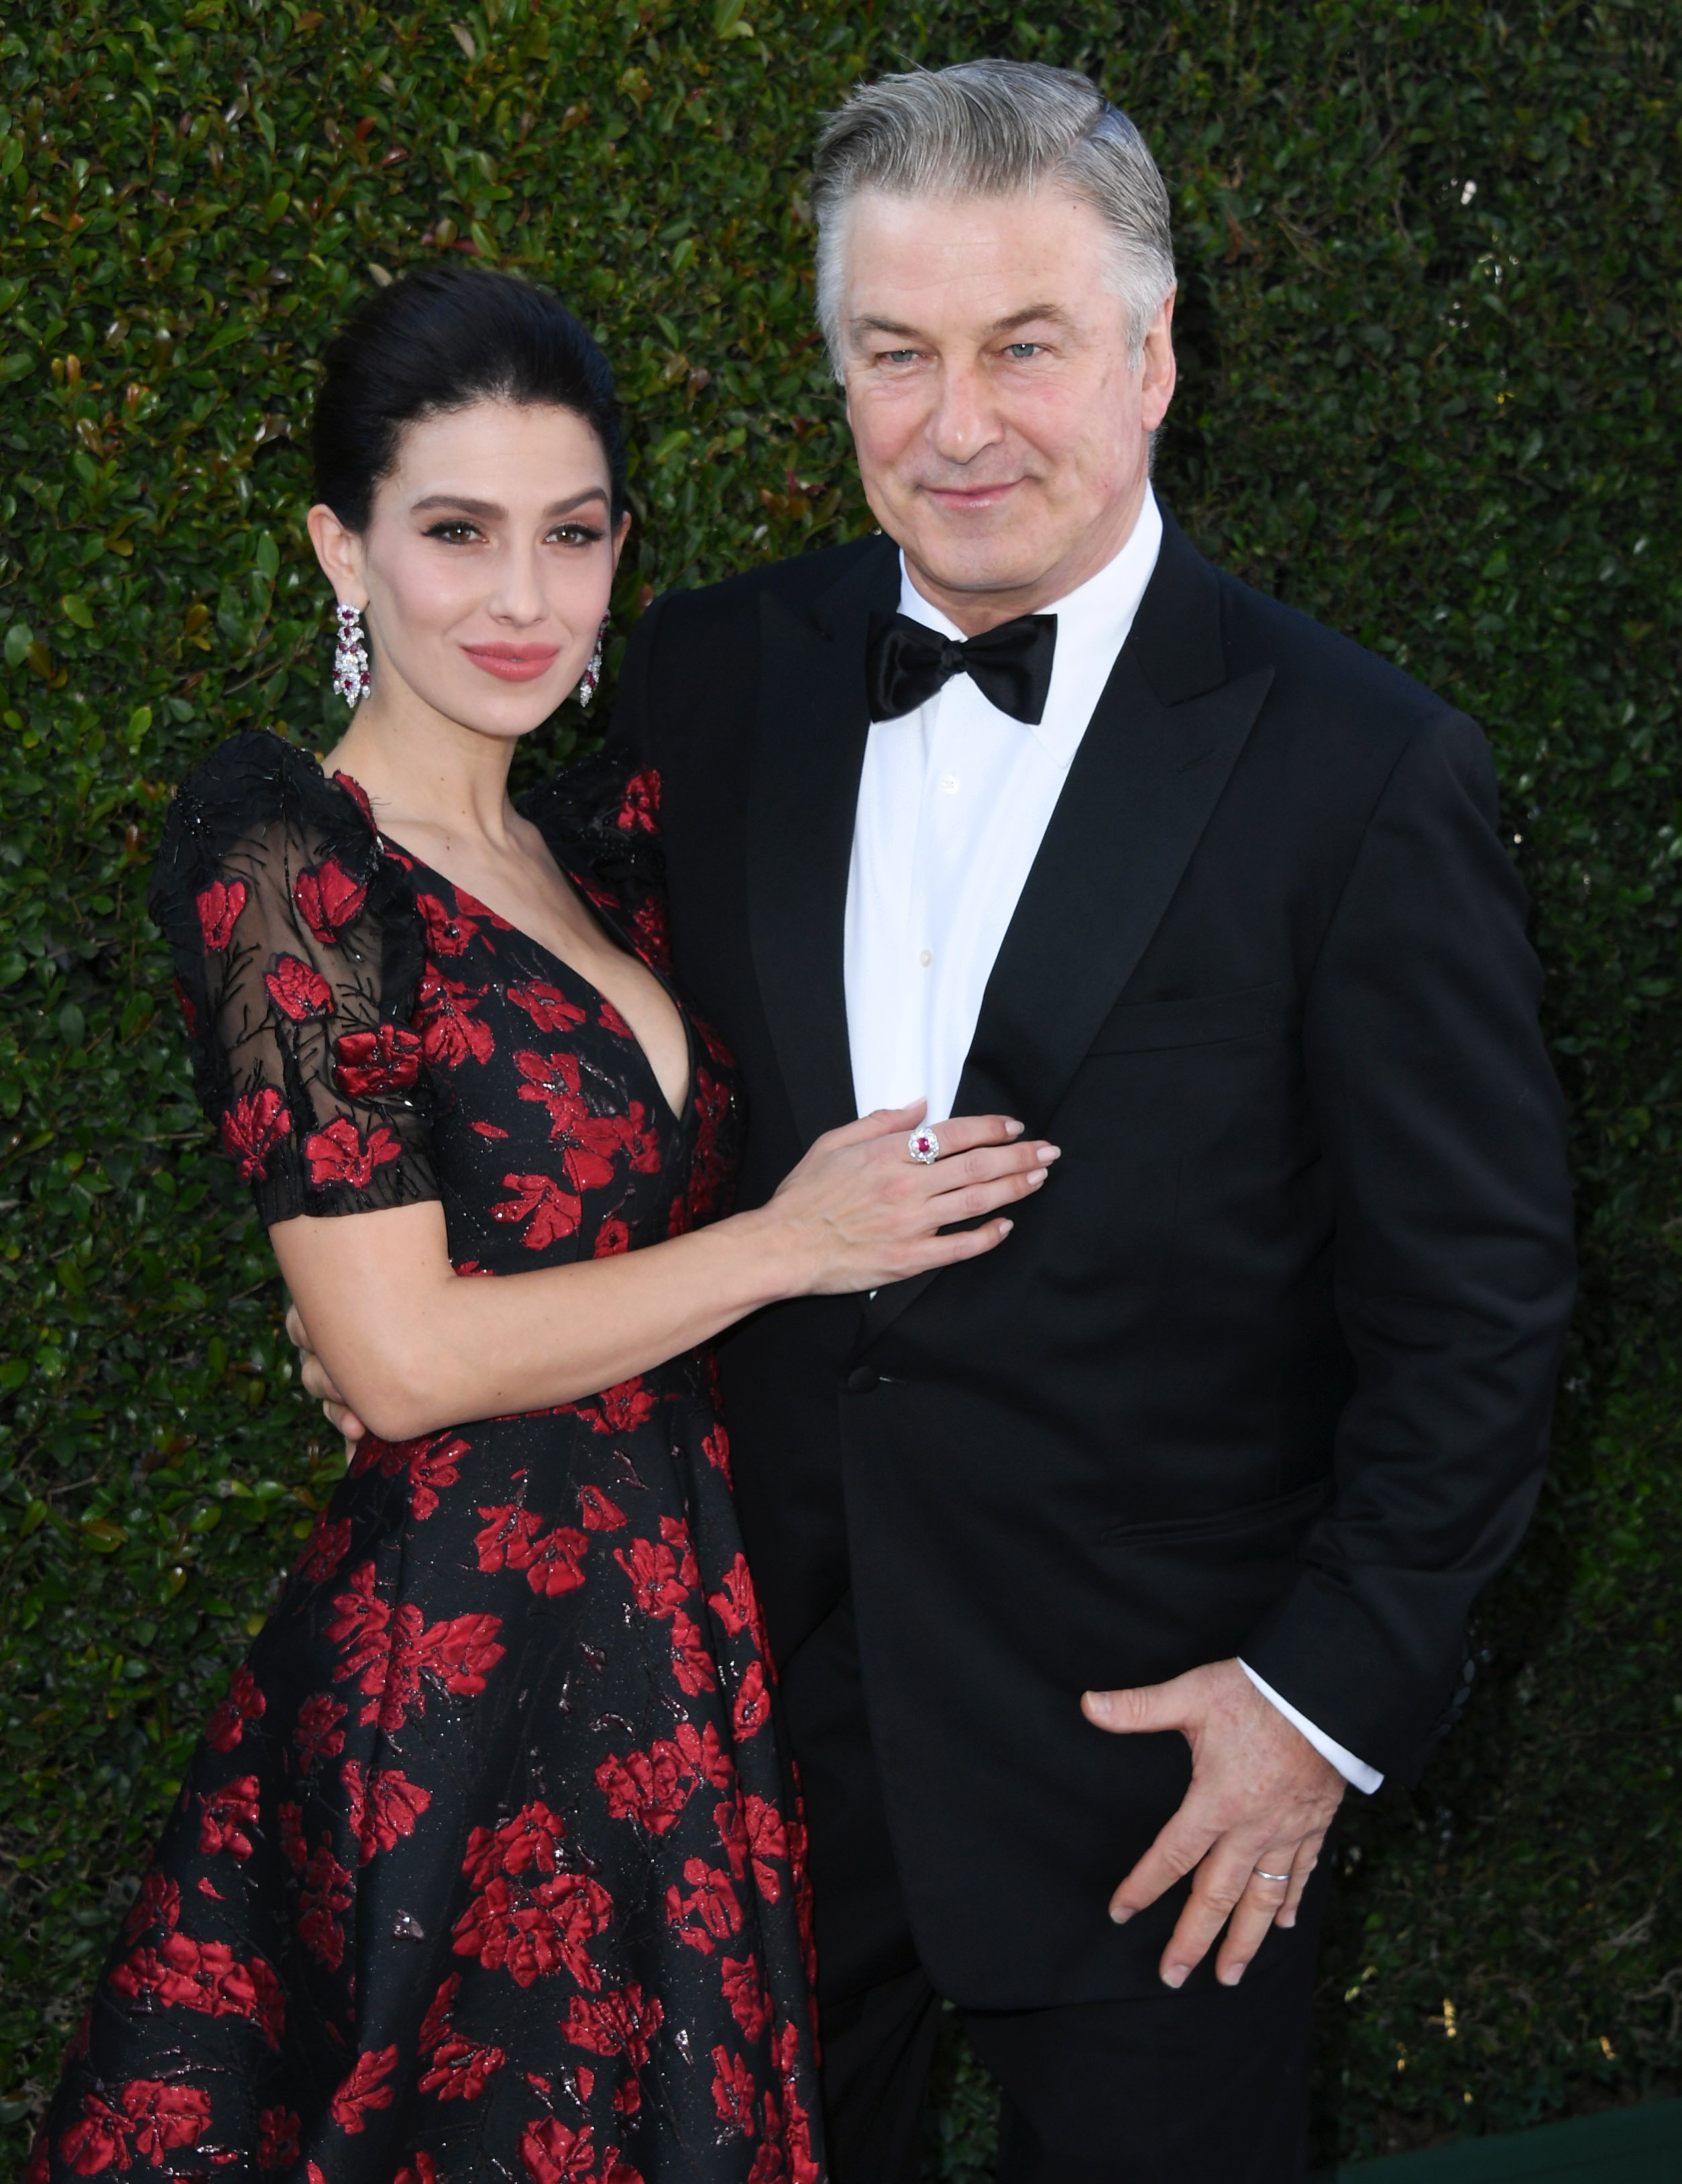 Hilaria Baldwin and Alec Baldwin attend 25th Annual Screen Actors Guild Awards on January 27, 2019, in Los Angeles, California. | Source: Getty Images.